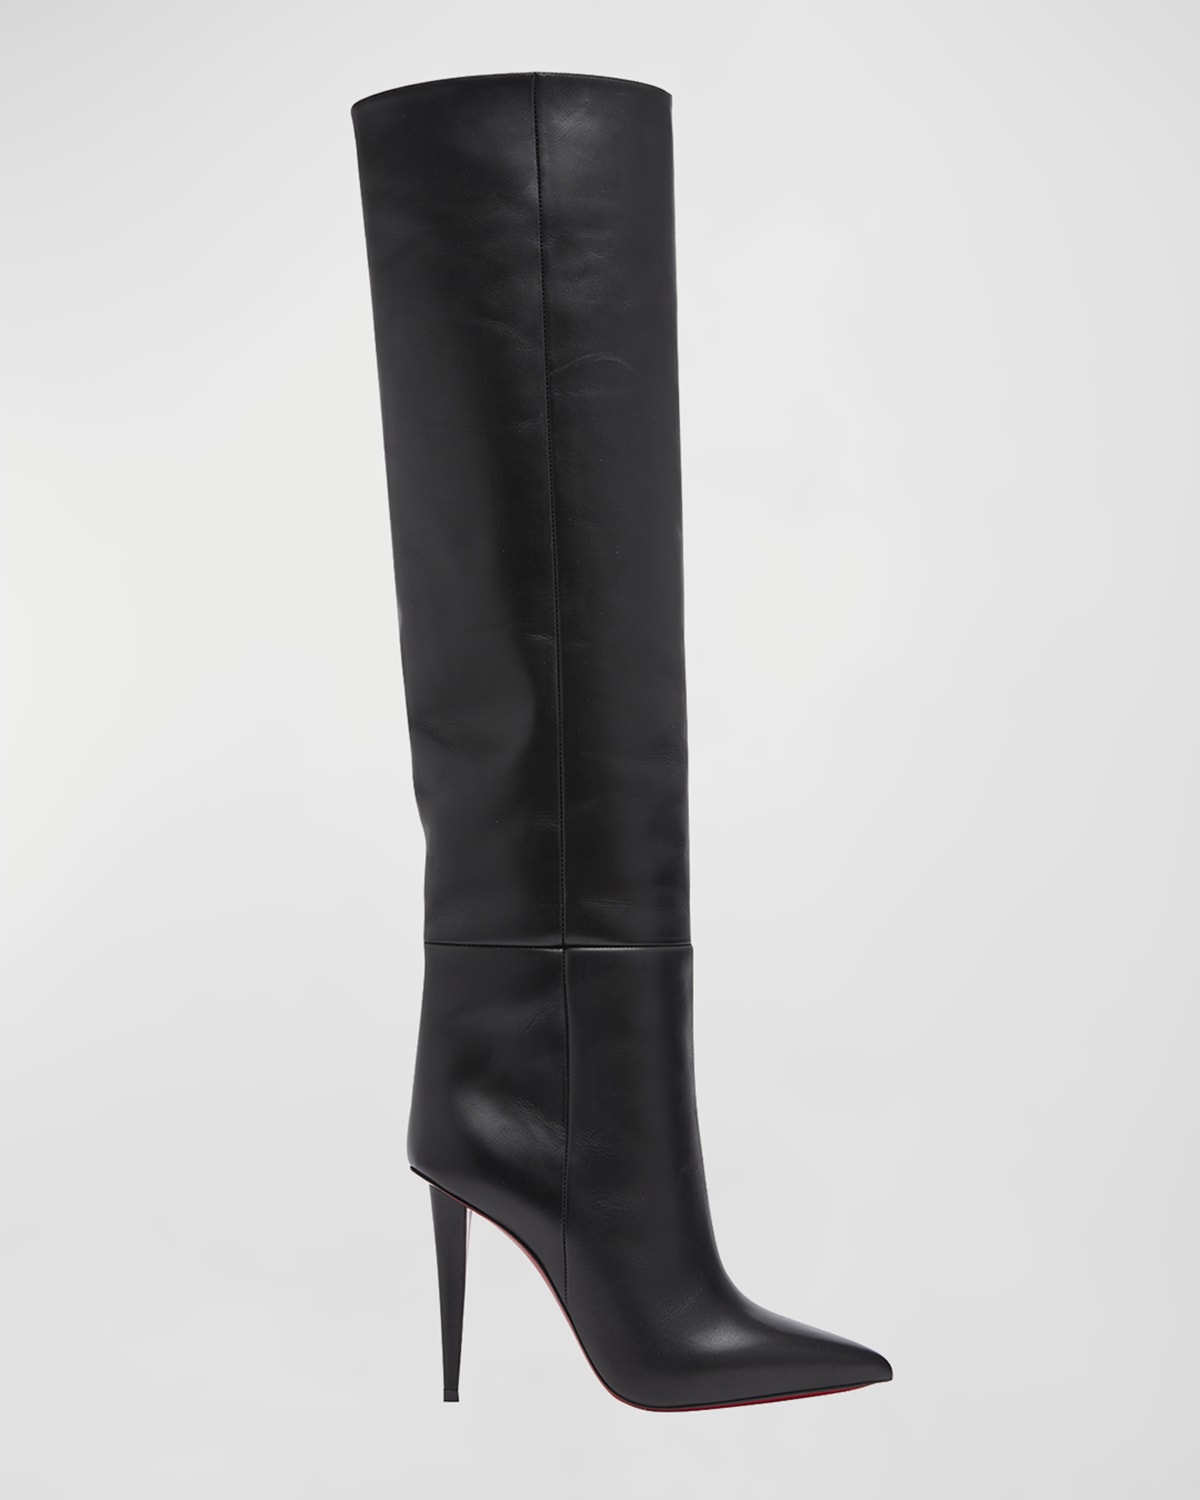 Christian Louboutin Pumppie Botta Red Sole Leather Knee-High Boots ...